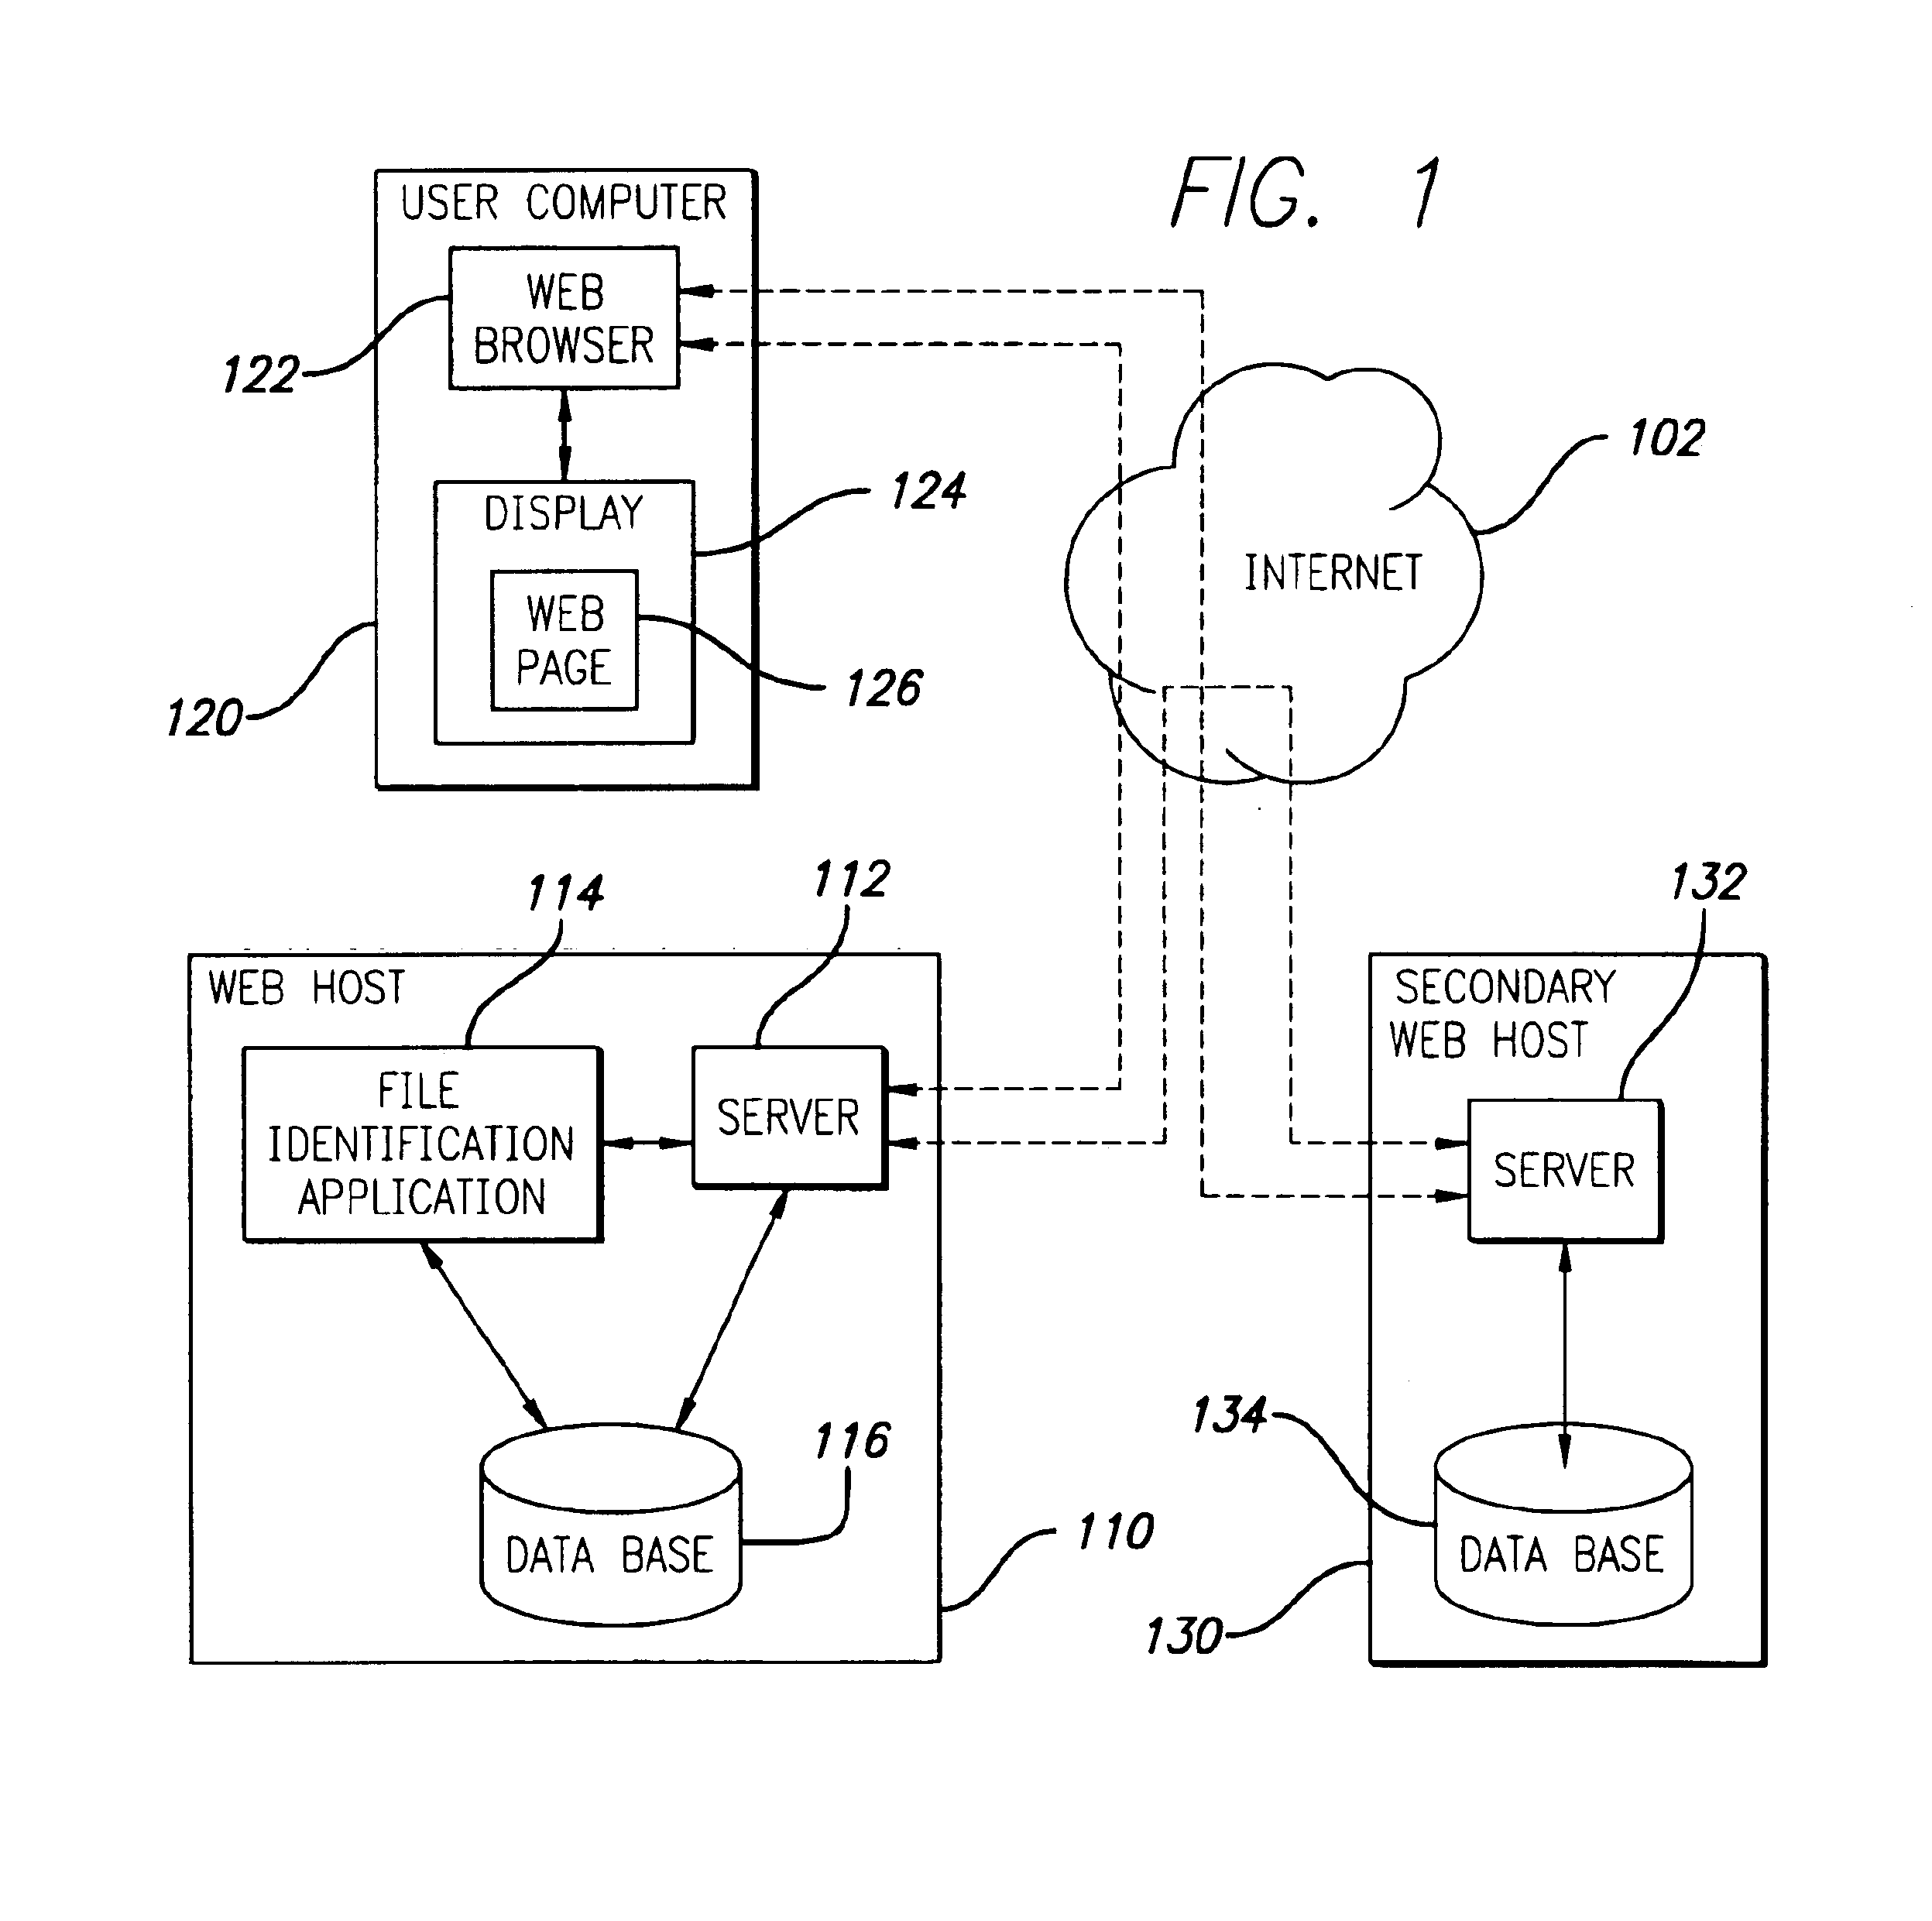 Method and apparatus for identifying and characterizing errant electronic files